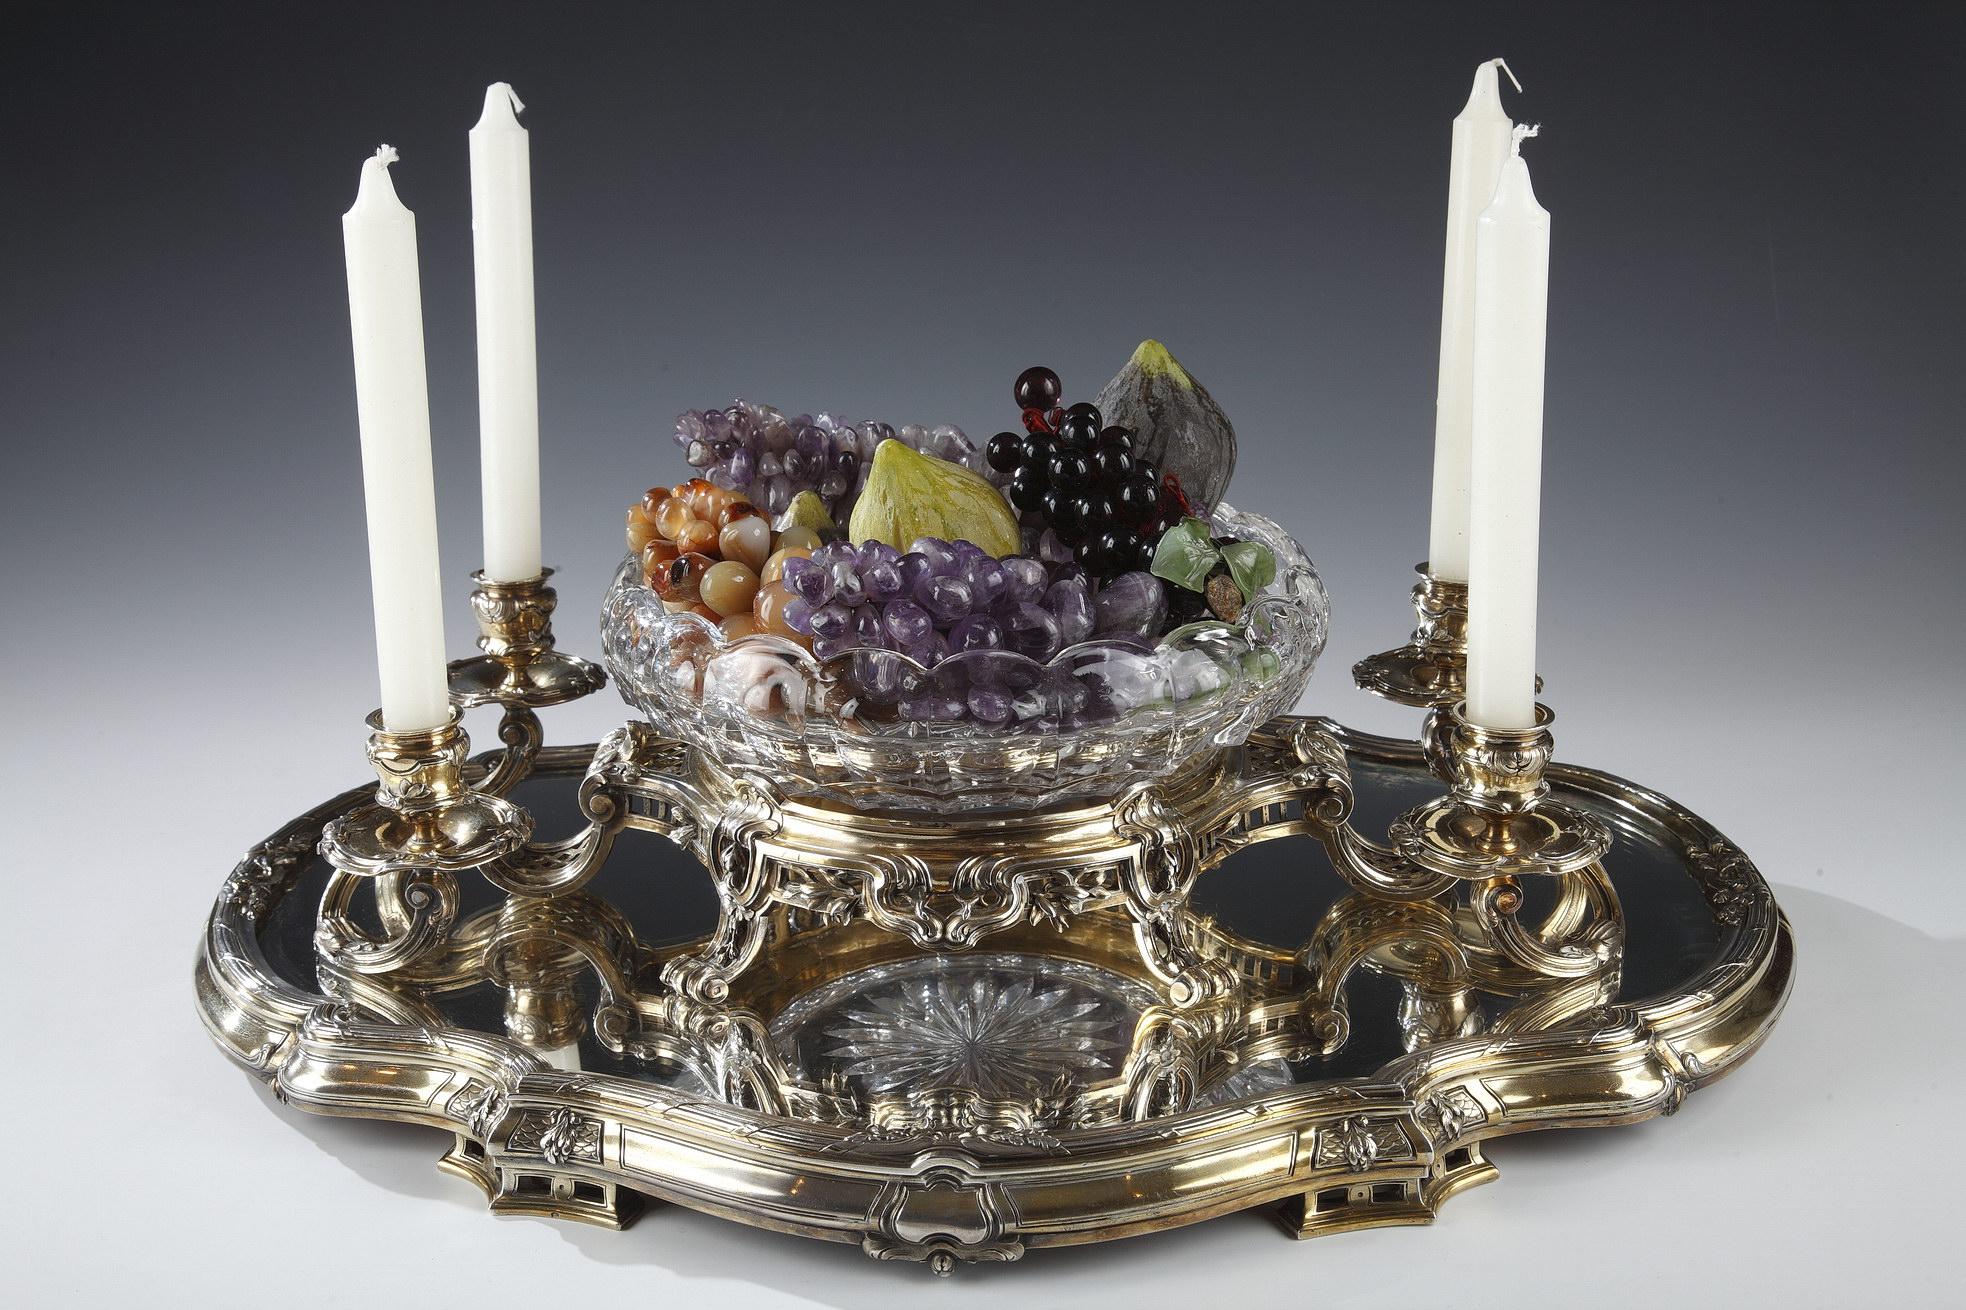 Elegant centerpiece in finely chiseled vermeil. Composed of a Baccarat cut-crystal cup from which emerge four sinuous light-arms. The whole rests on a scalloped mirrored tray adorned with foliage, with a molded contour of wrapped rushes and ending